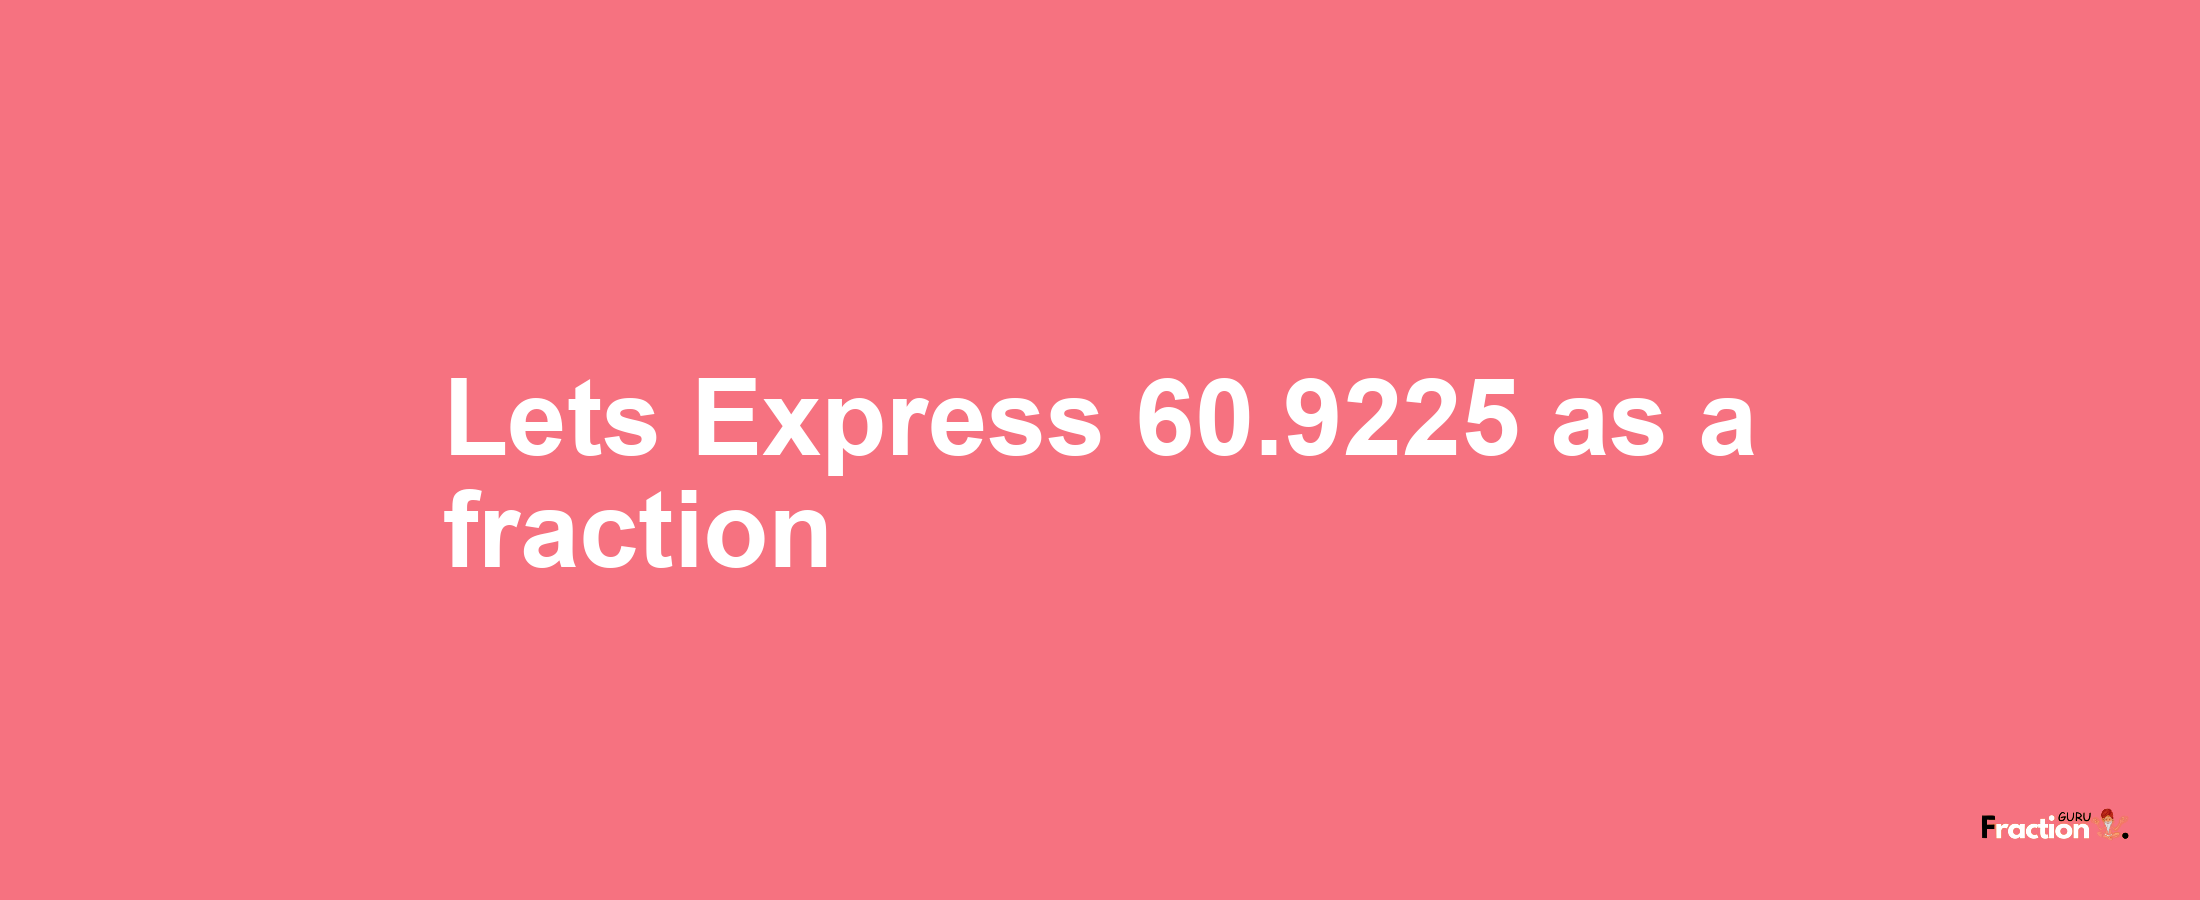 Lets Express 60.9225 as afraction